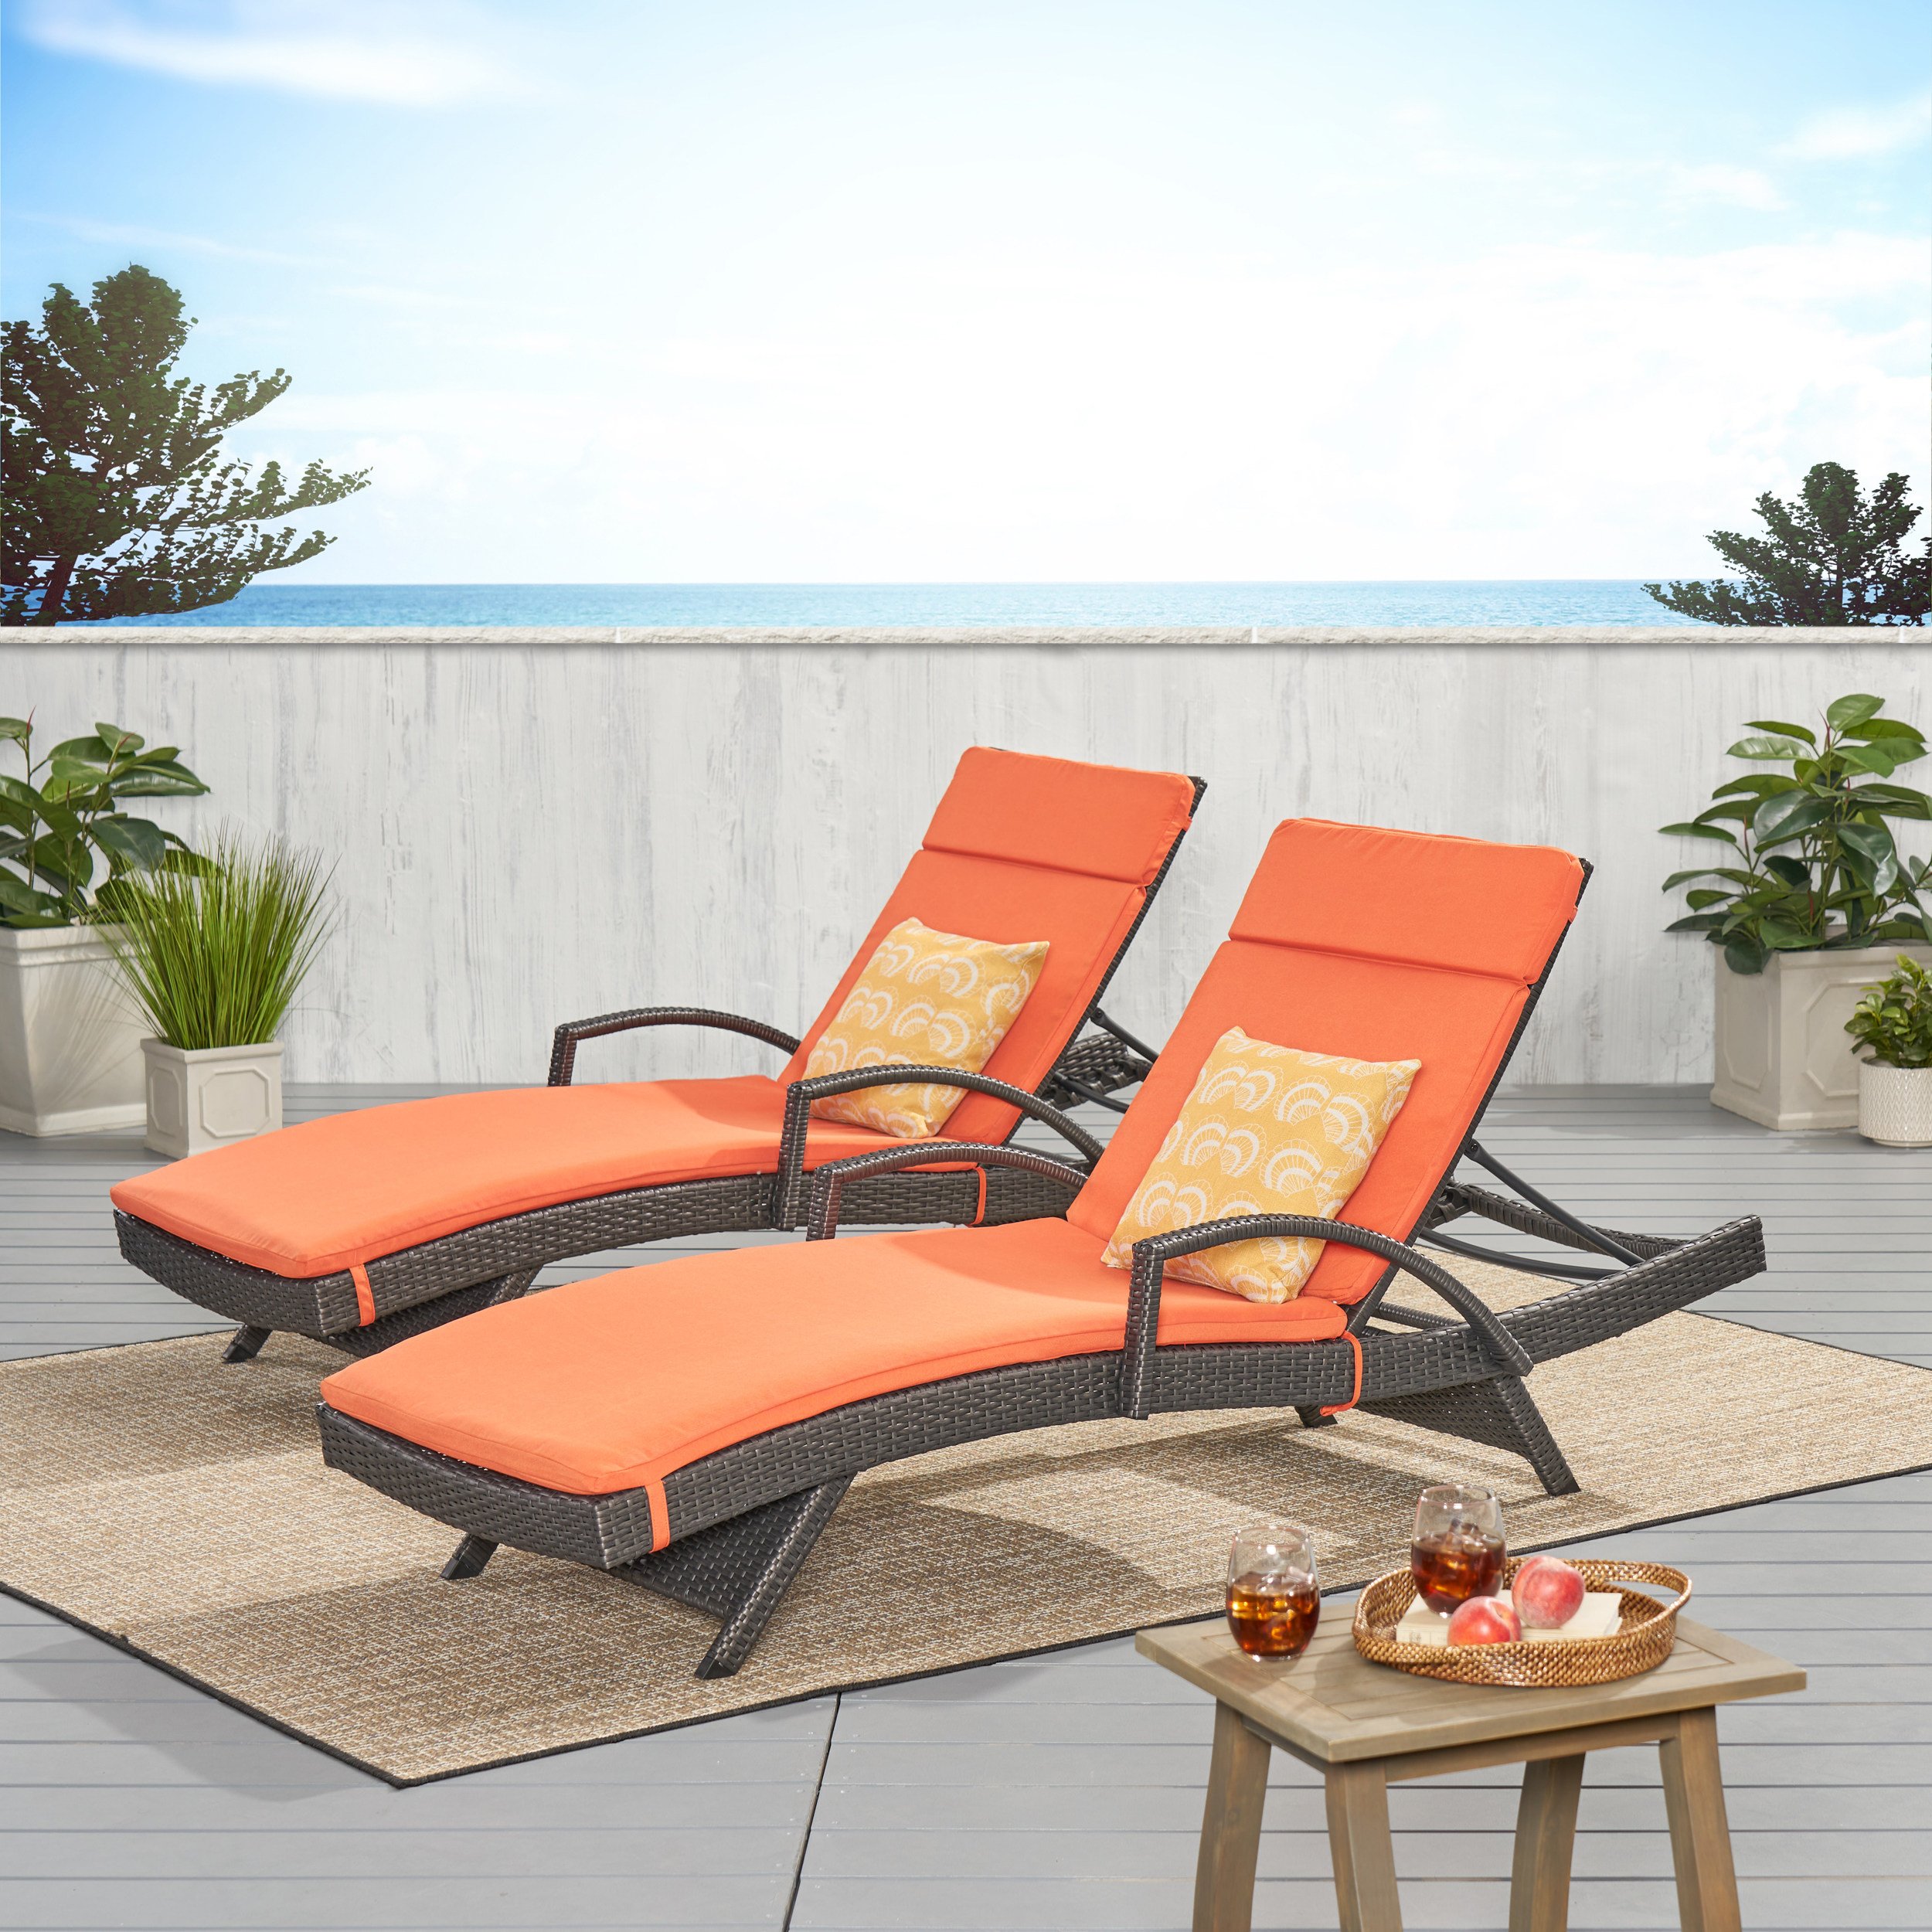 Soleil Outdoor Wicker Chaise Lounges With Water Resistant Cushions (Set Of 2) - Textured Beige